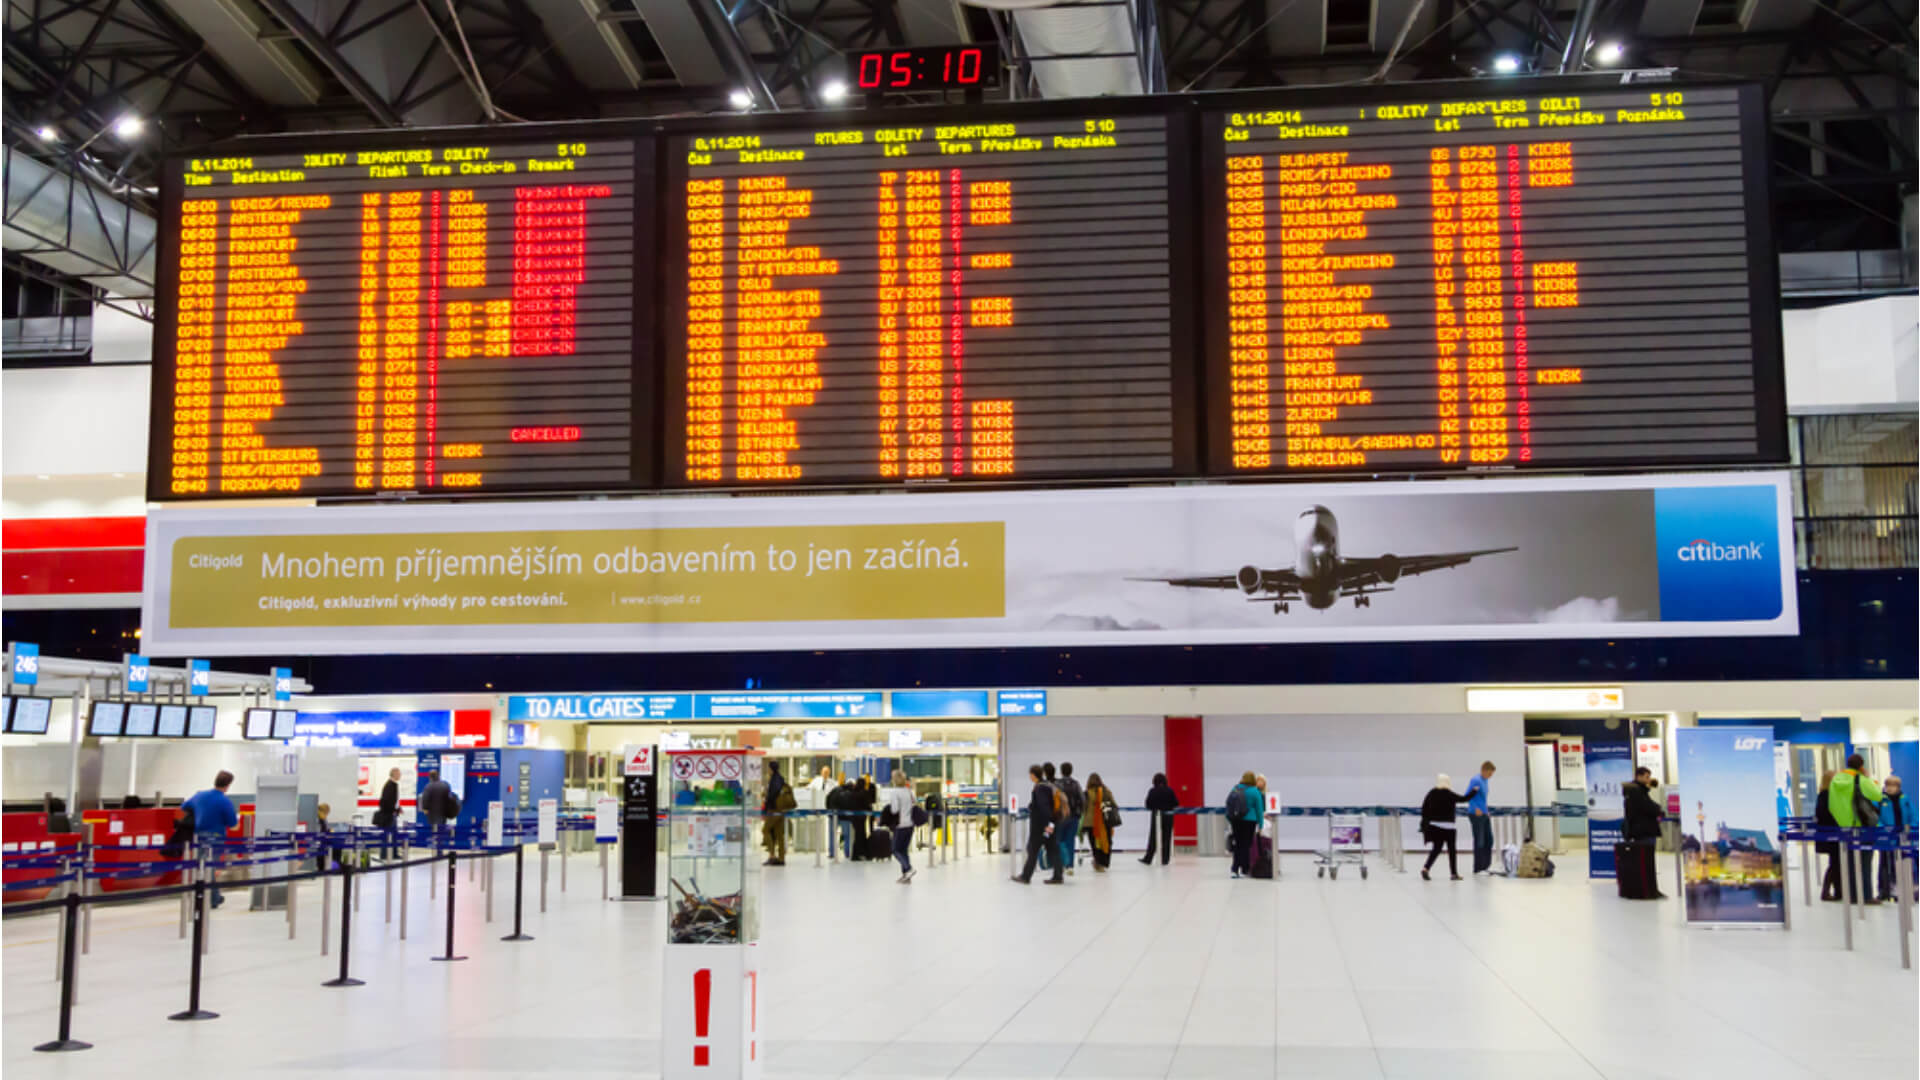 Digital Signage at Airports: Think beyond FIDS